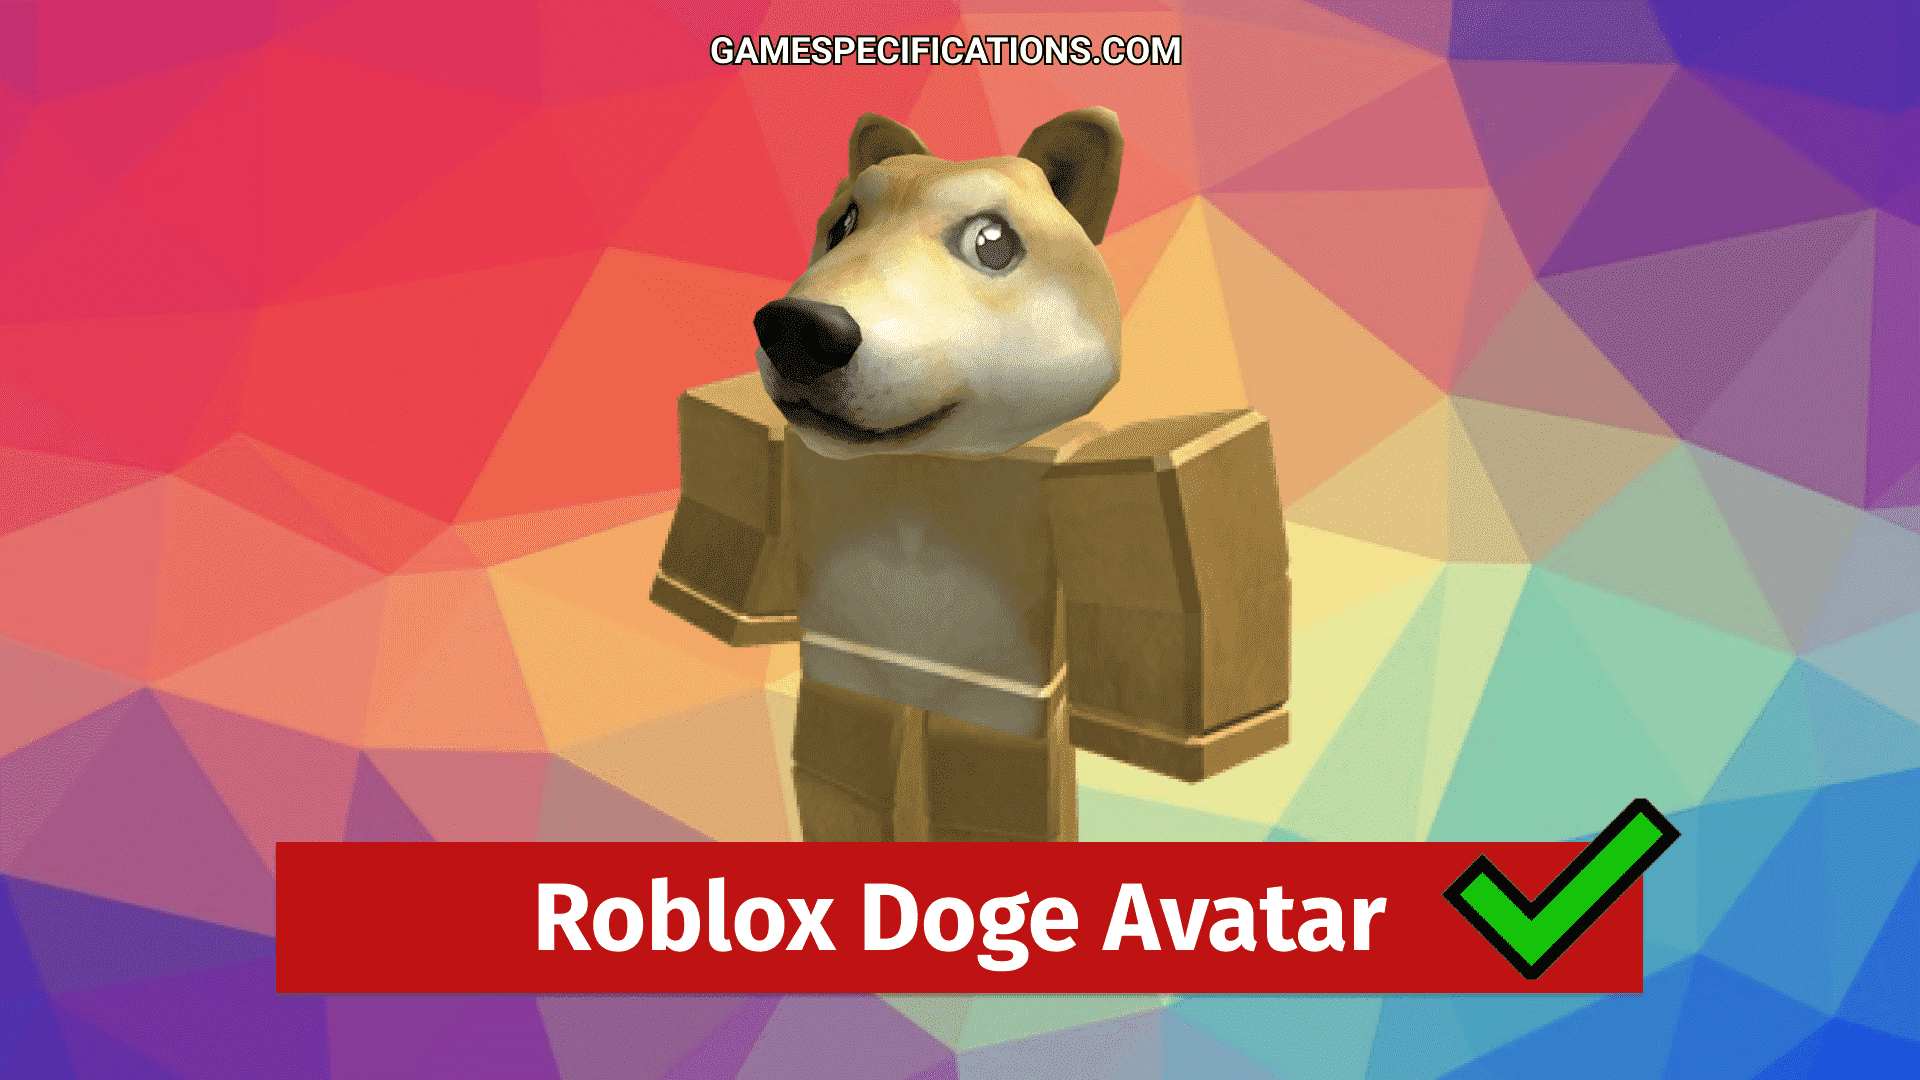 Awesome Roblox Doge Avatar Guide Game Specifications - full doge outfit roblox id